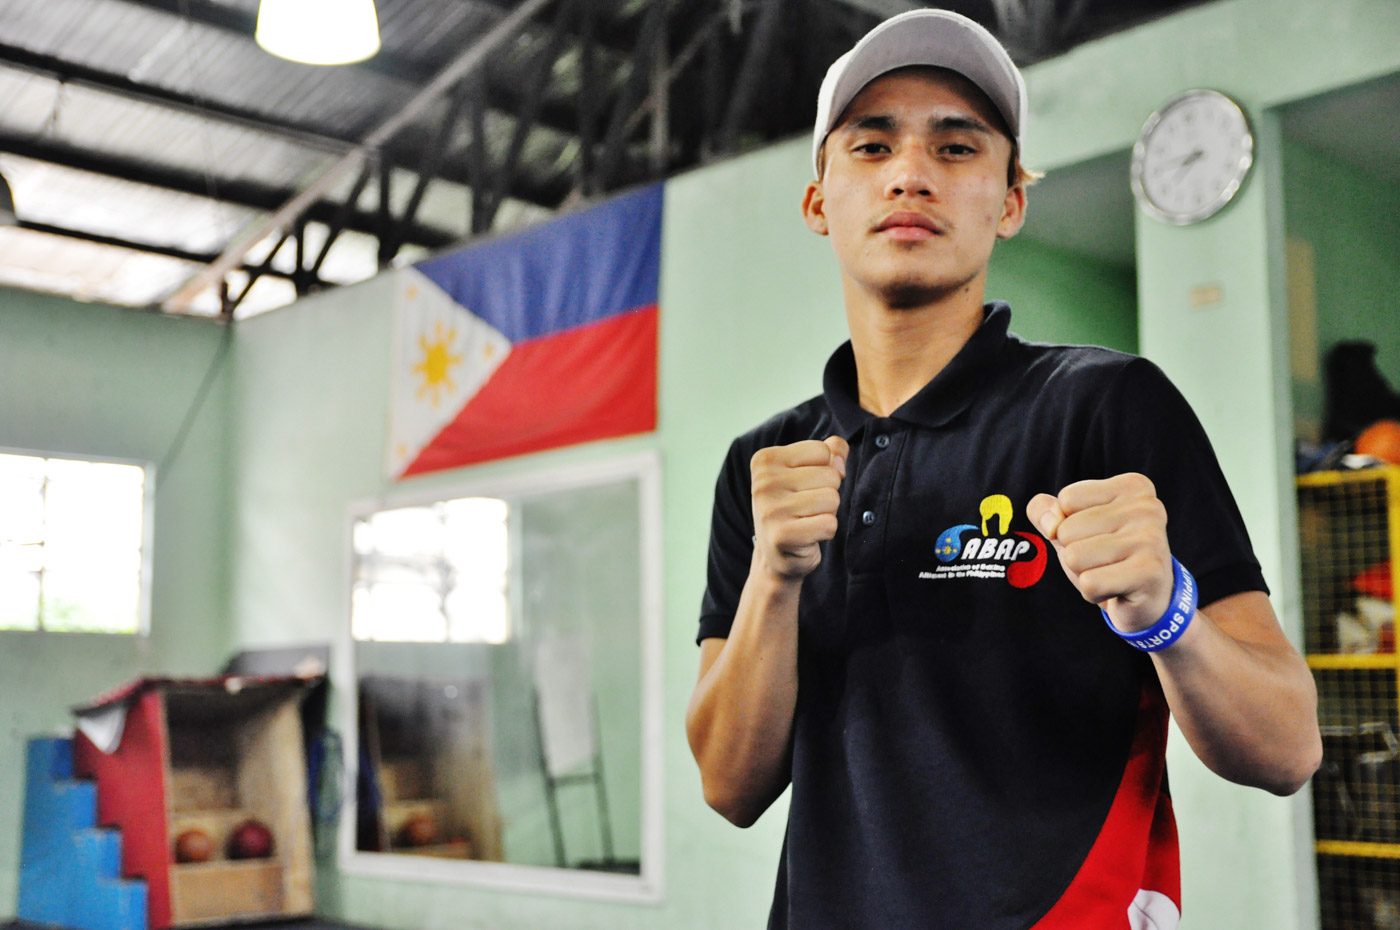 After SEA Games fervor, PH boxers Maamo, Ladon out to conquer the world